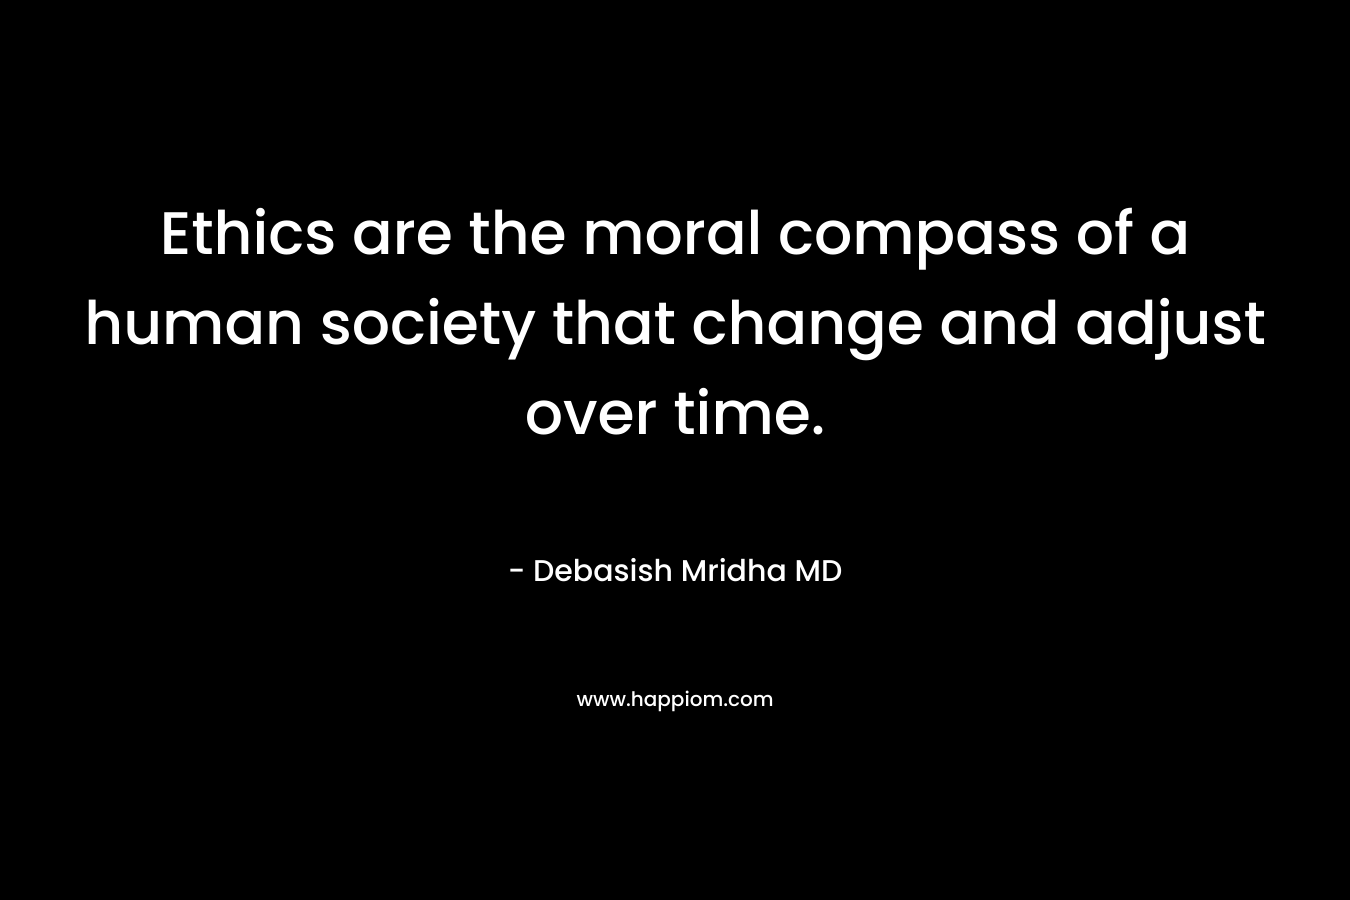 Ethics are the moral compass of a human society that change and adjust over time. – Debasish Mridha MD